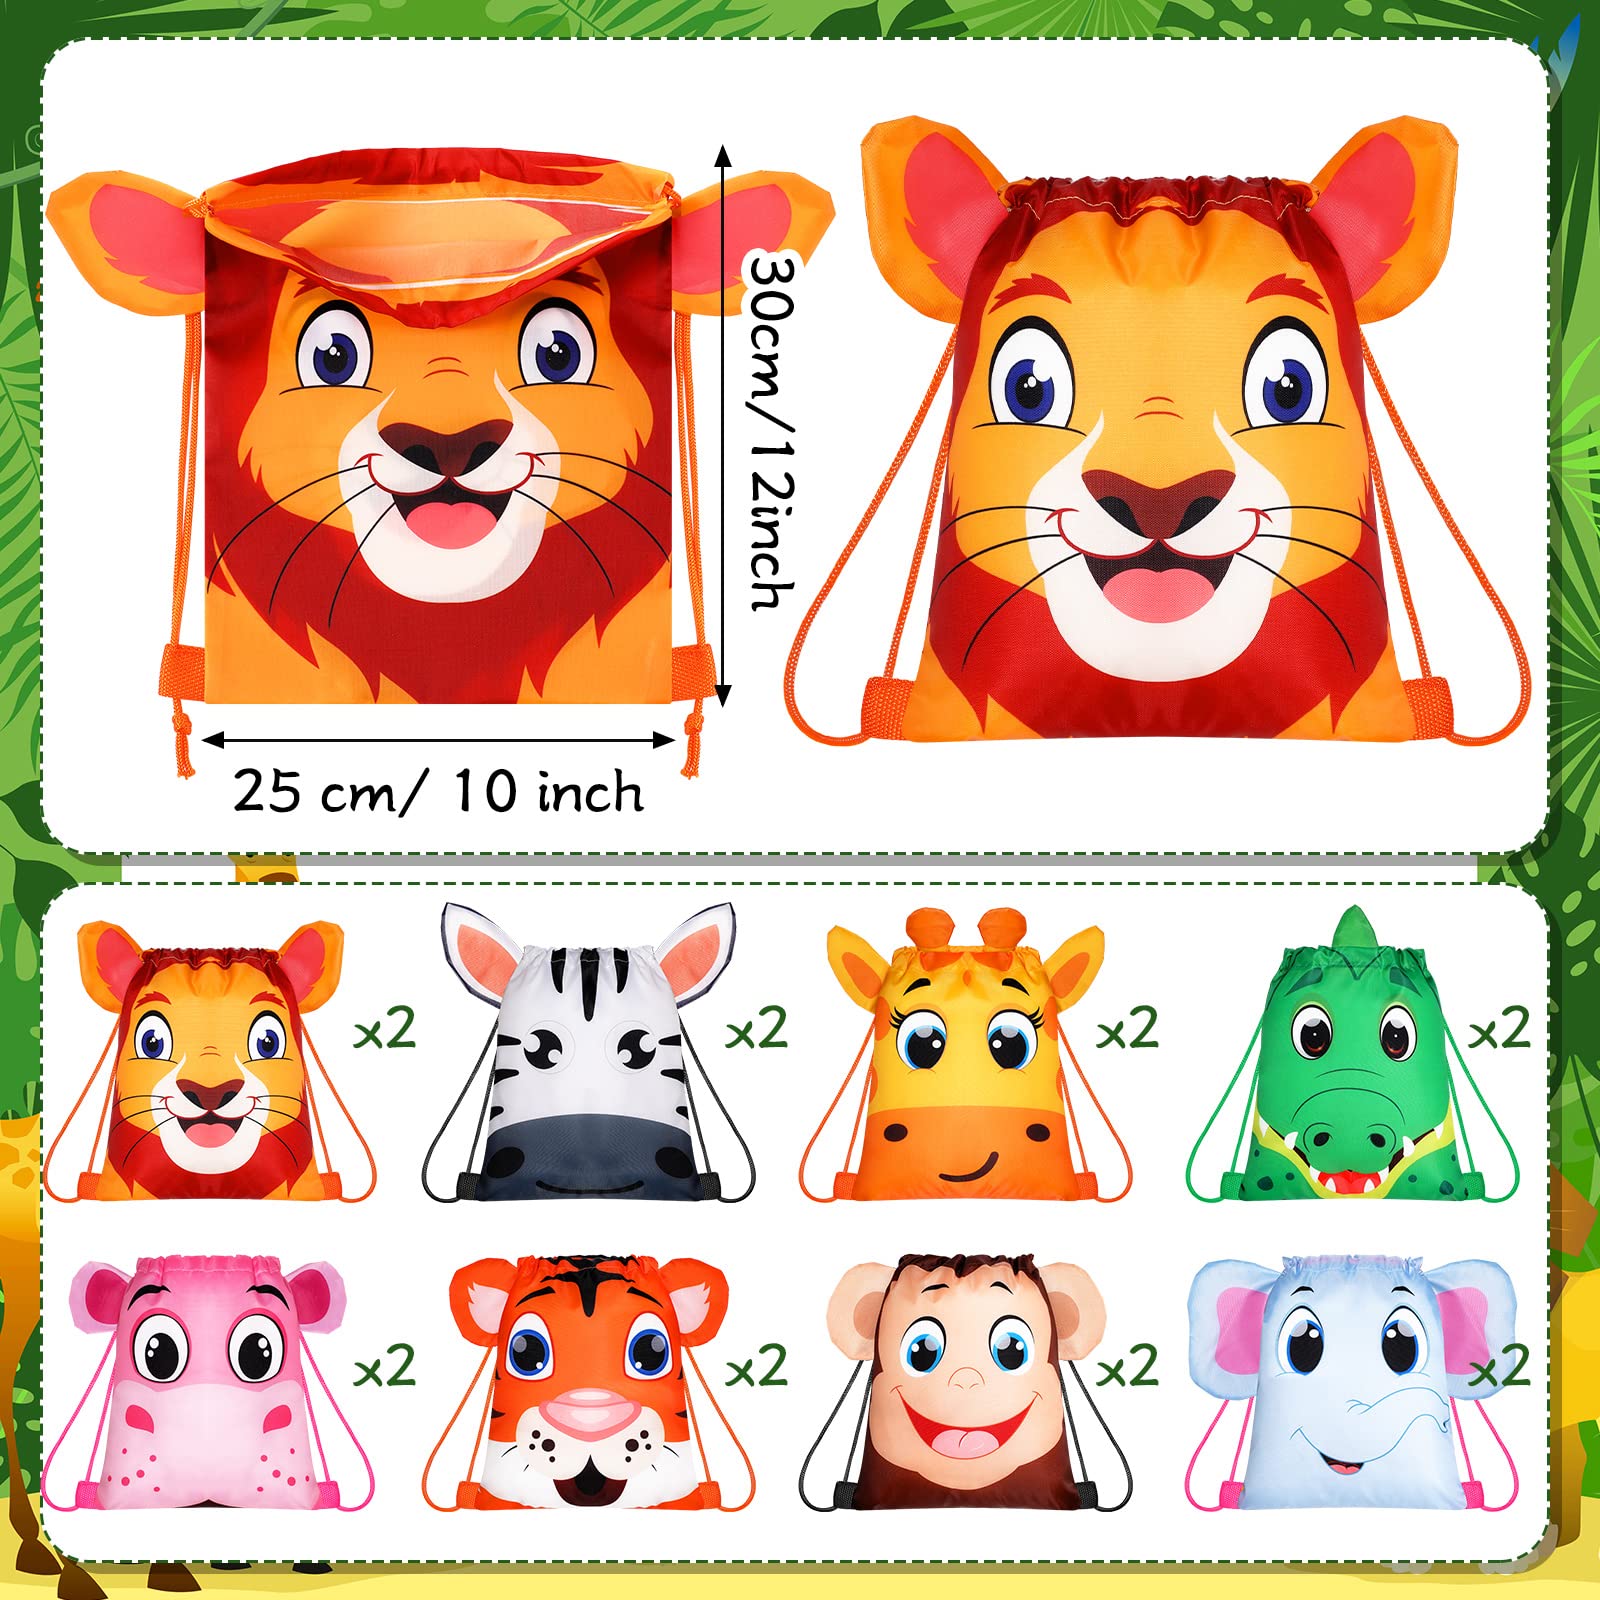 Hillban 16 Pcs Animal Drawstring Gift Bags Farm Zoo Jungle String Party Goody Bags Party Favor Bags Carton Animal Drawstring Backpack with Ear for Kids Safari Baby Shower Birthday Party(Jungle Style)